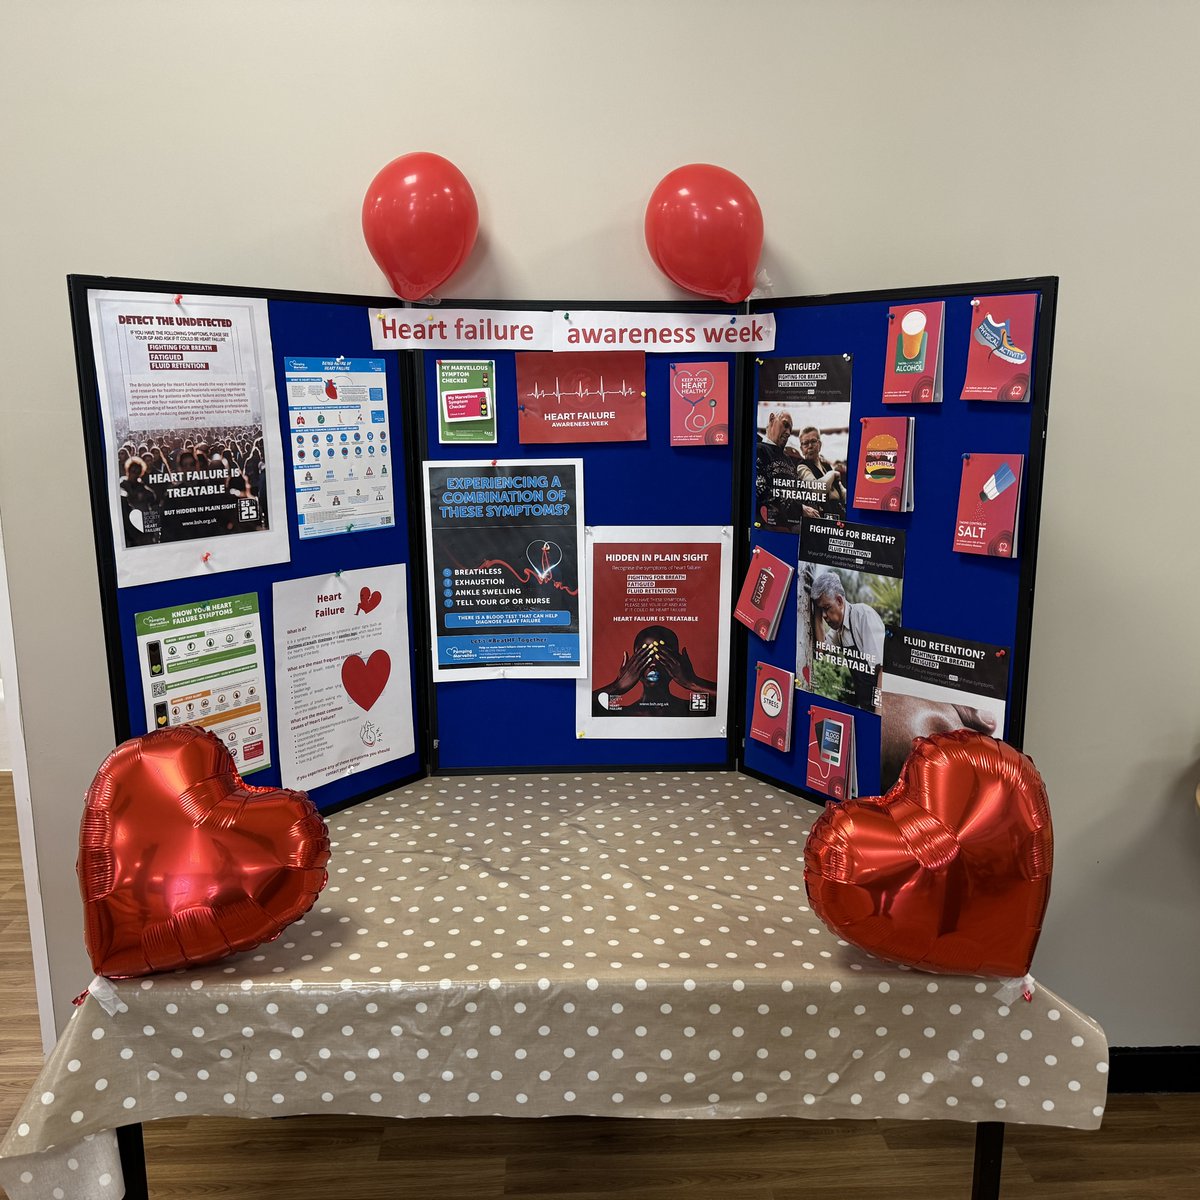 This week is Heart Failure Awareness.

The British Society for Heart Failure is committed to reducing the number of heart failure deaths by 25% over the next 25 years.

For more information visit our stand in The Hub and Main Outpatients or head to bsh.org.uk/25in25 #25in25